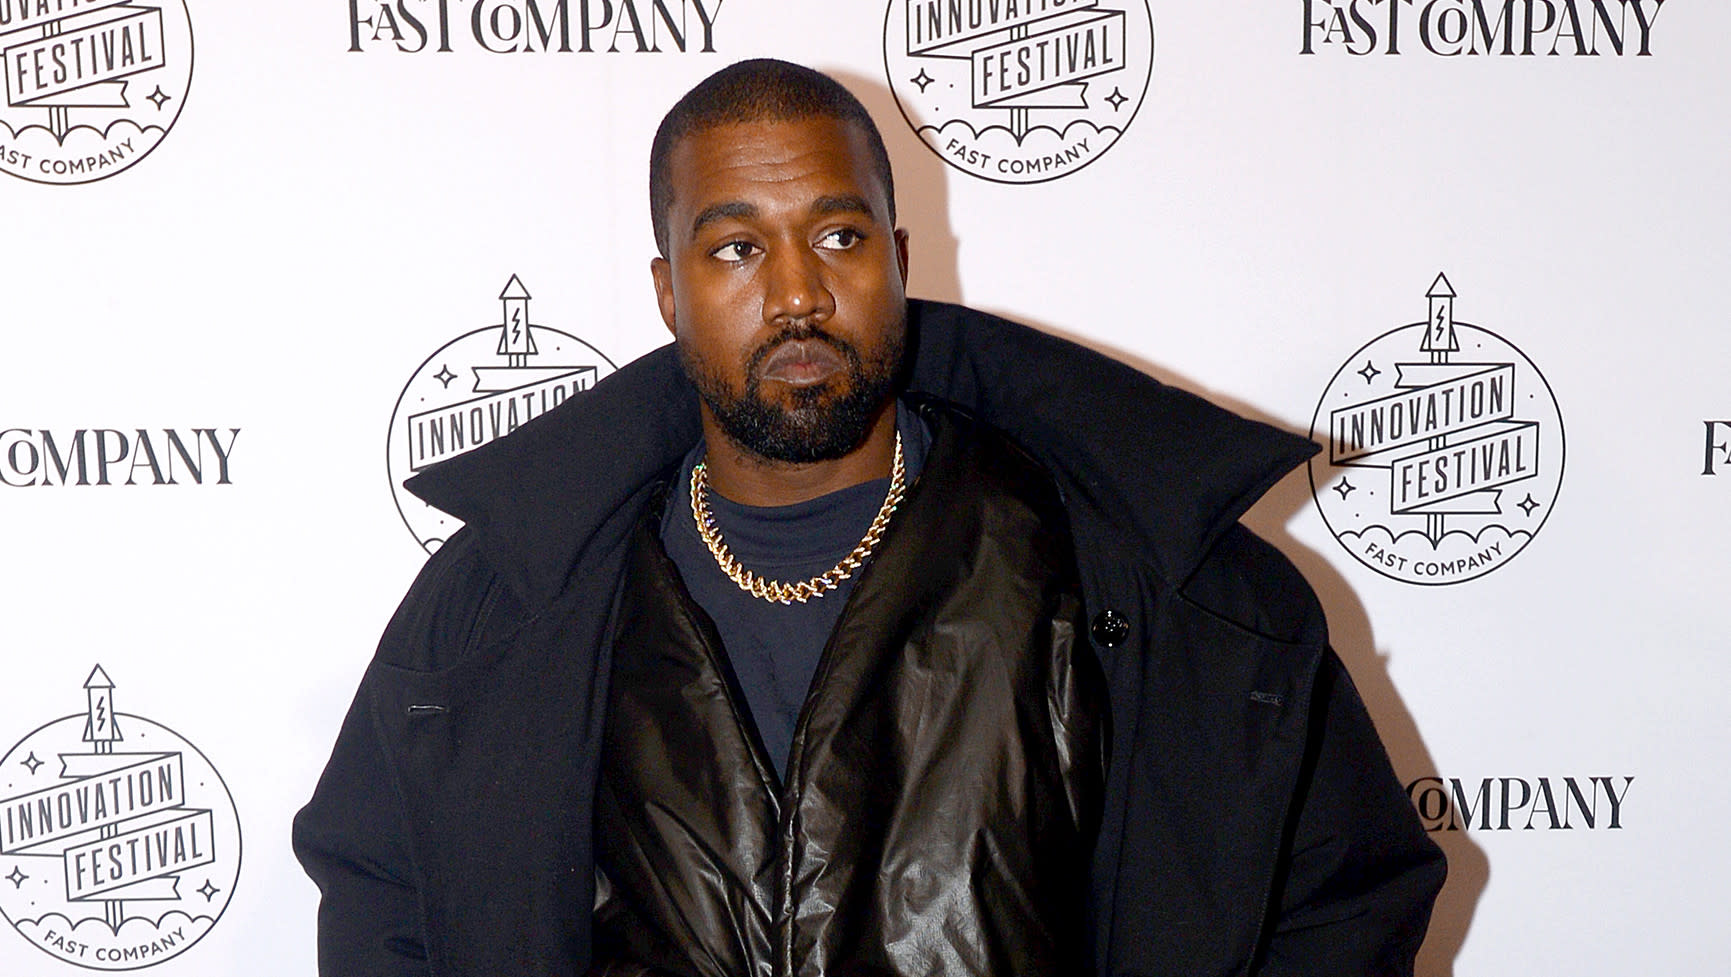 Kanye West allegedly moves 500 pairs of sneakers from Kim Kardashian’s home